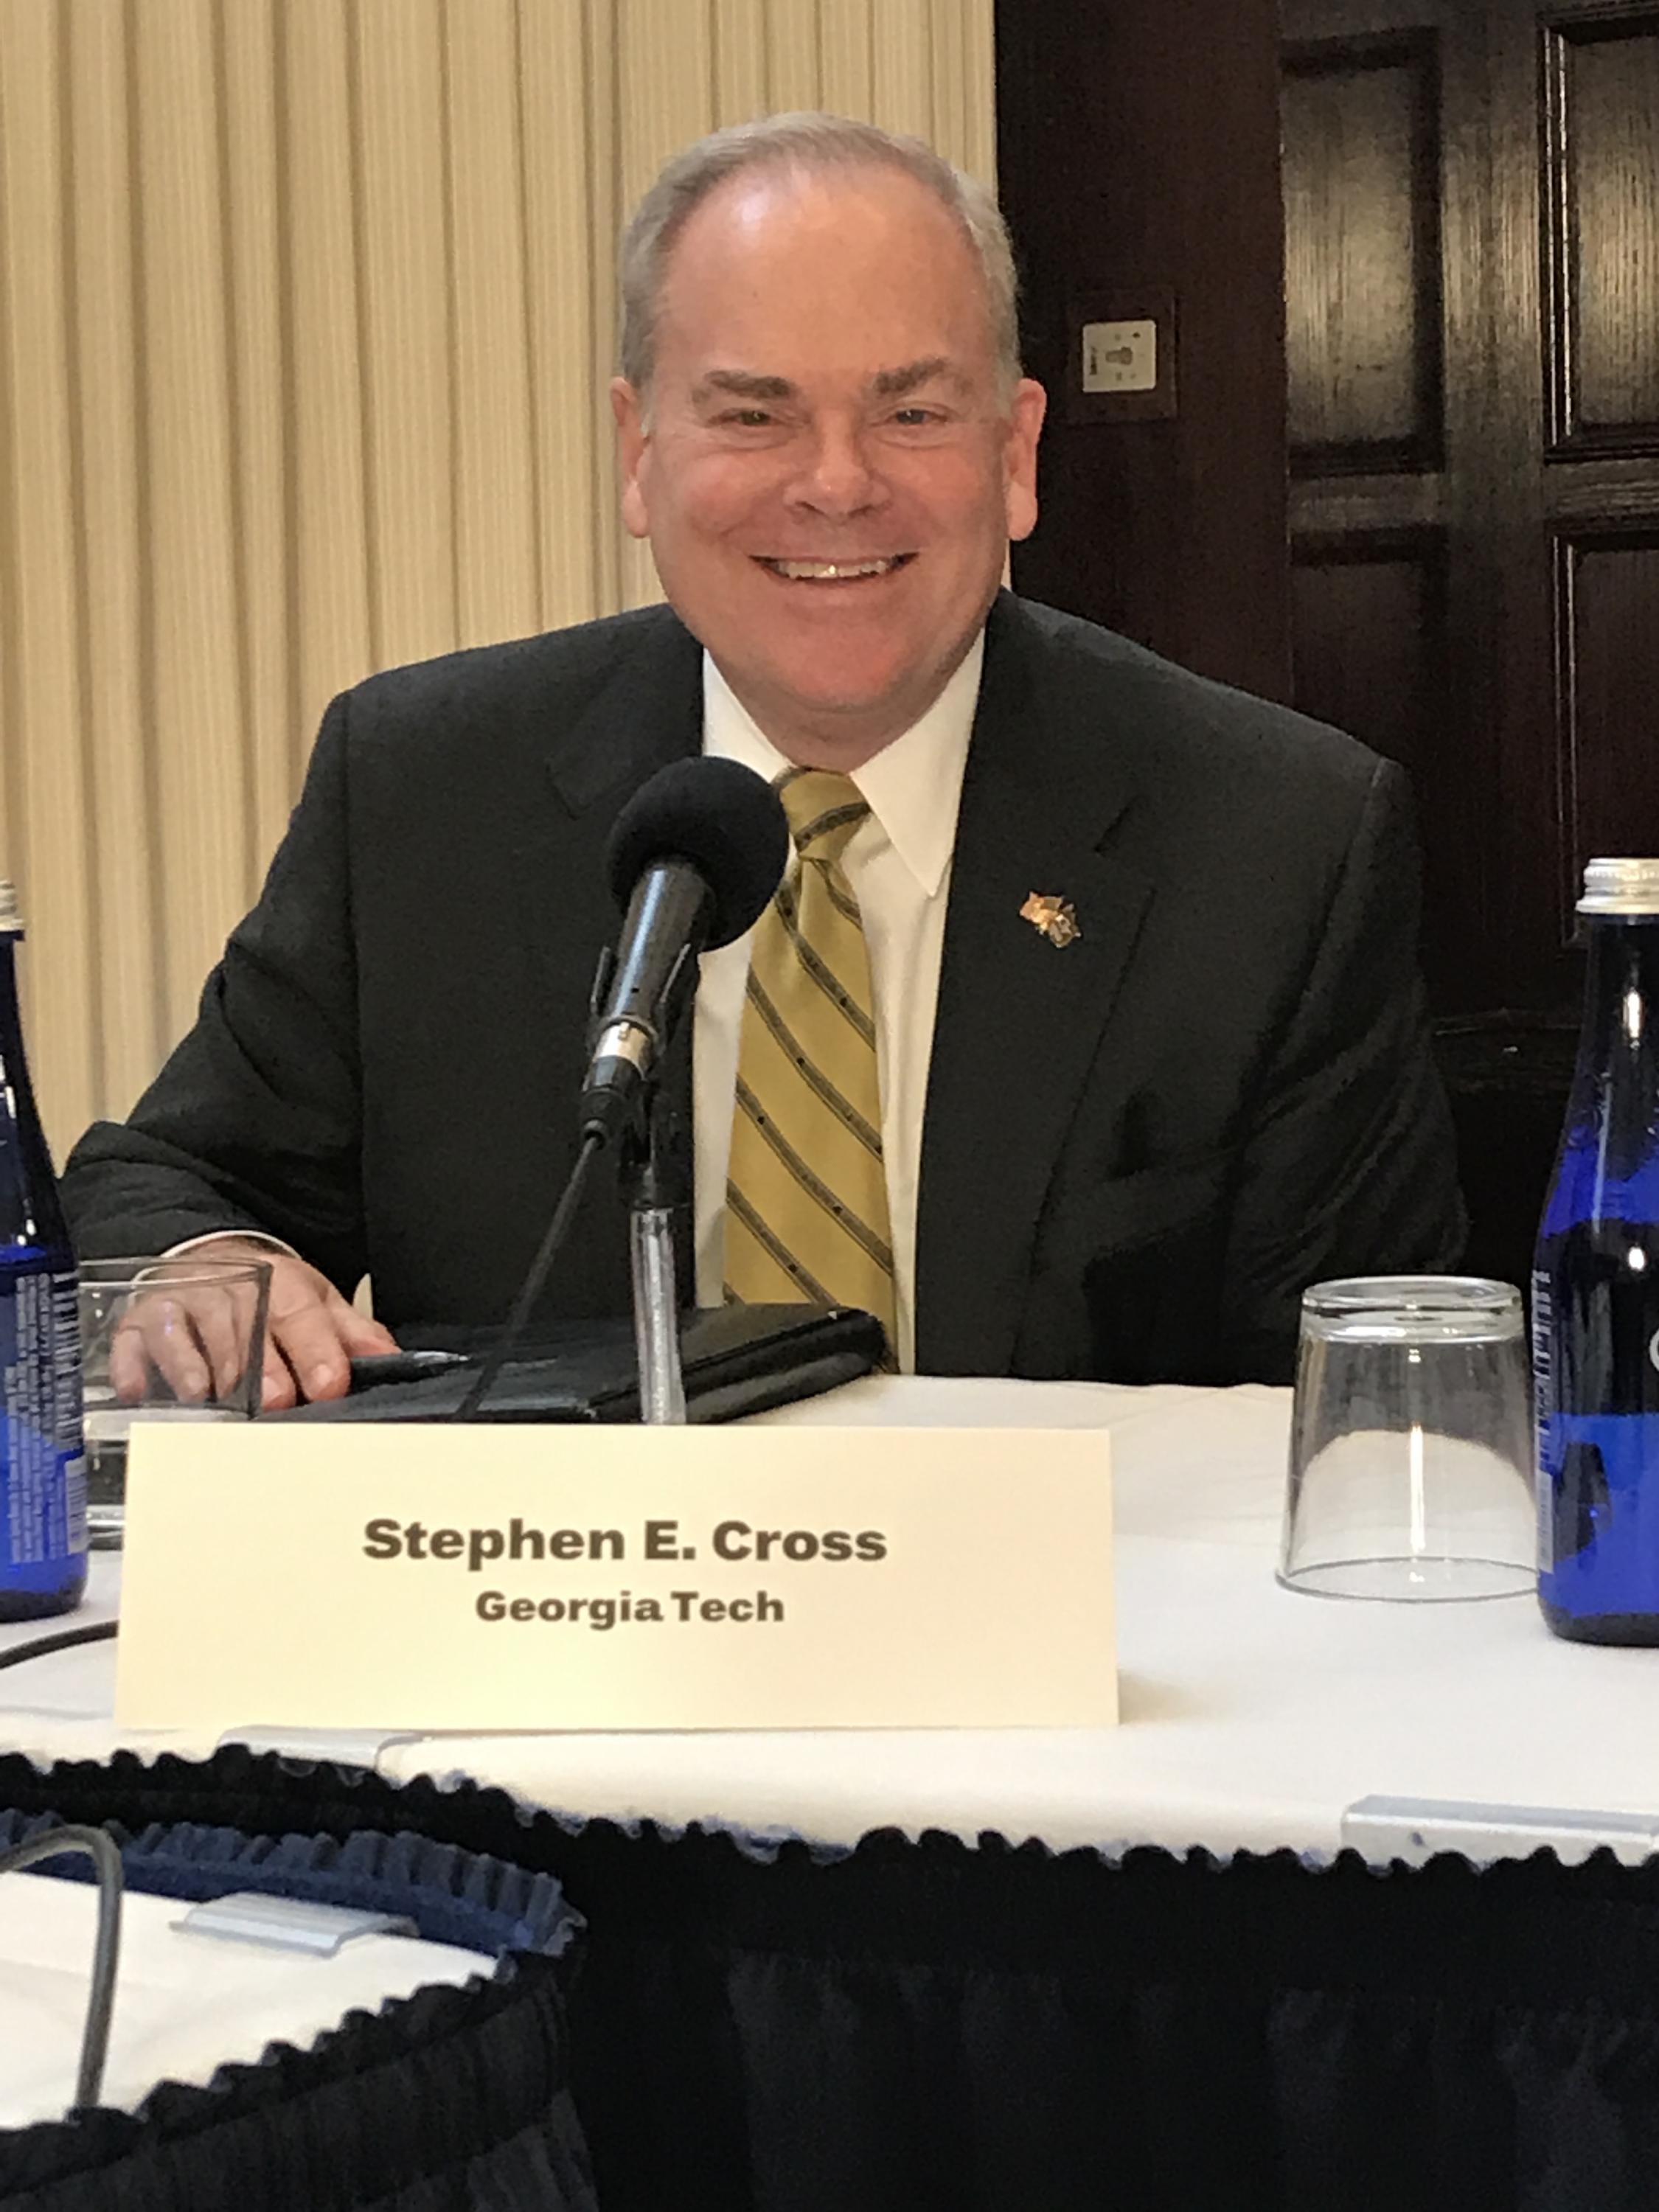 Steve Cross, Georgia Tech’s executive vice president for research, was one of 11 panelists for a media roundtable discussion about “The State of American Science.”  The event was organized by the Association of American Universities and The Science Coalition.